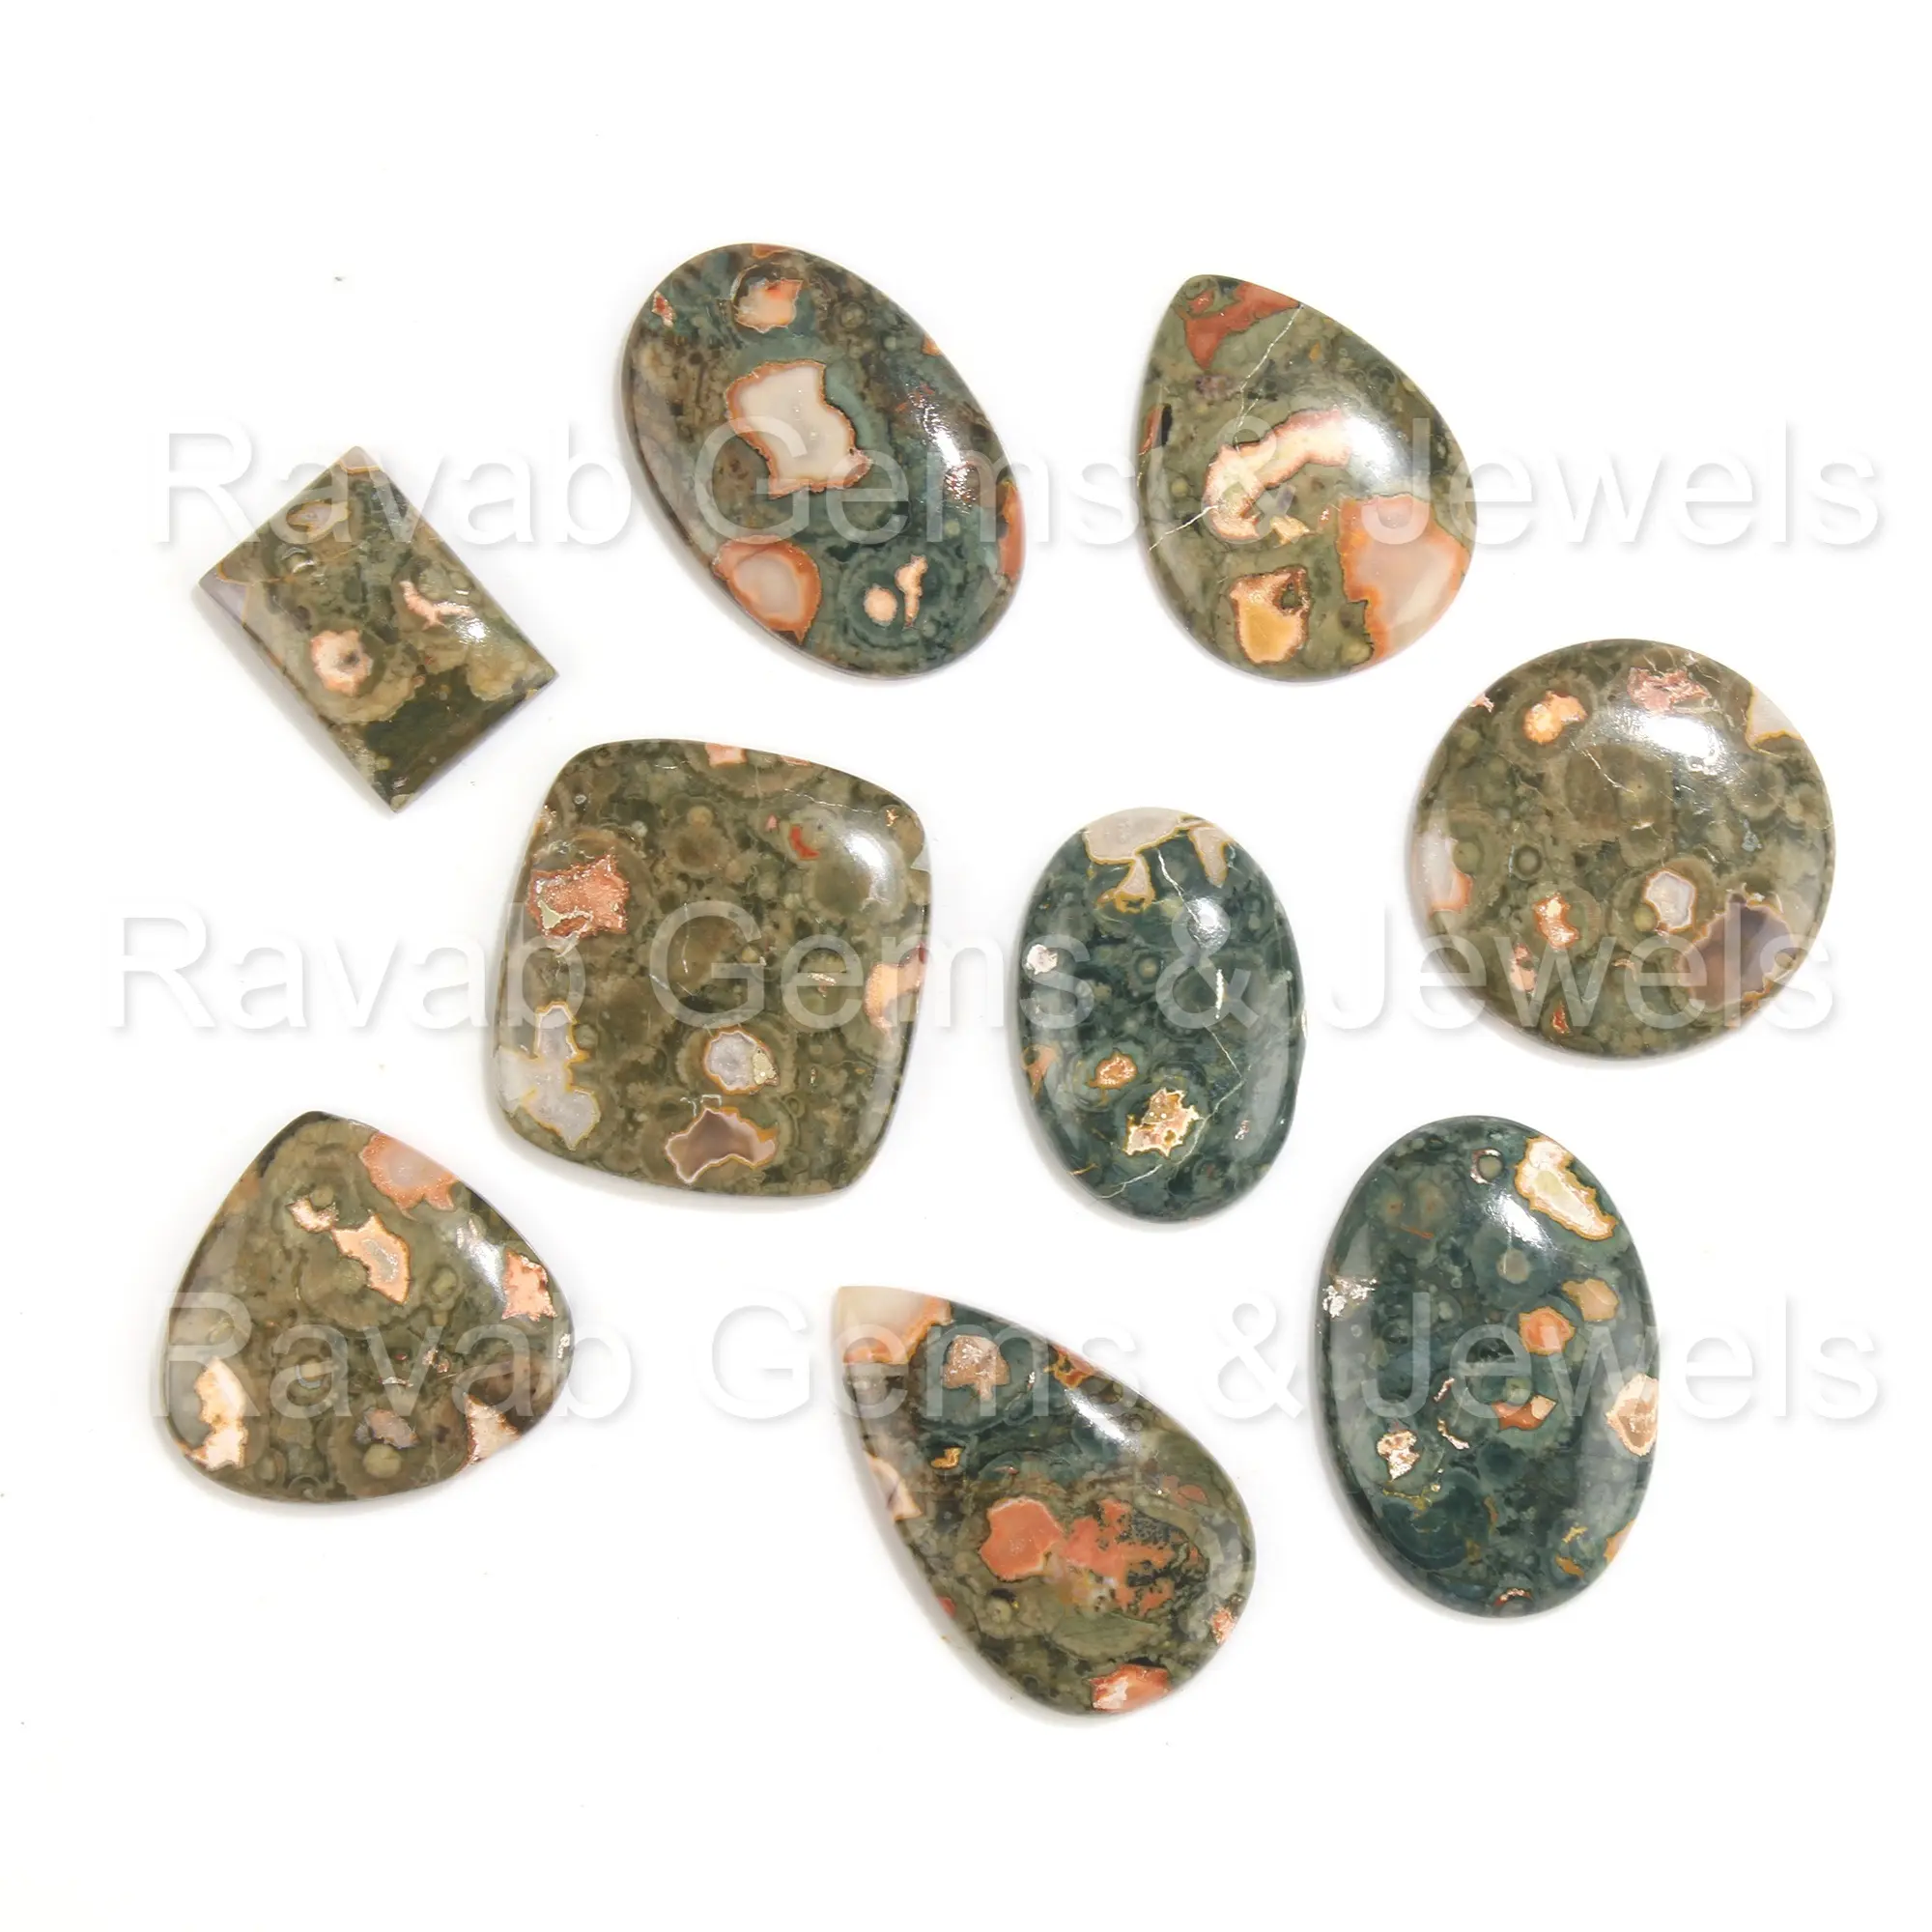 High Polished Natural Ocean Jasper Smooth Mix Shape Loose Gemstone Lot Cabochons For Making Jewelry Wholesale Per Gram Price